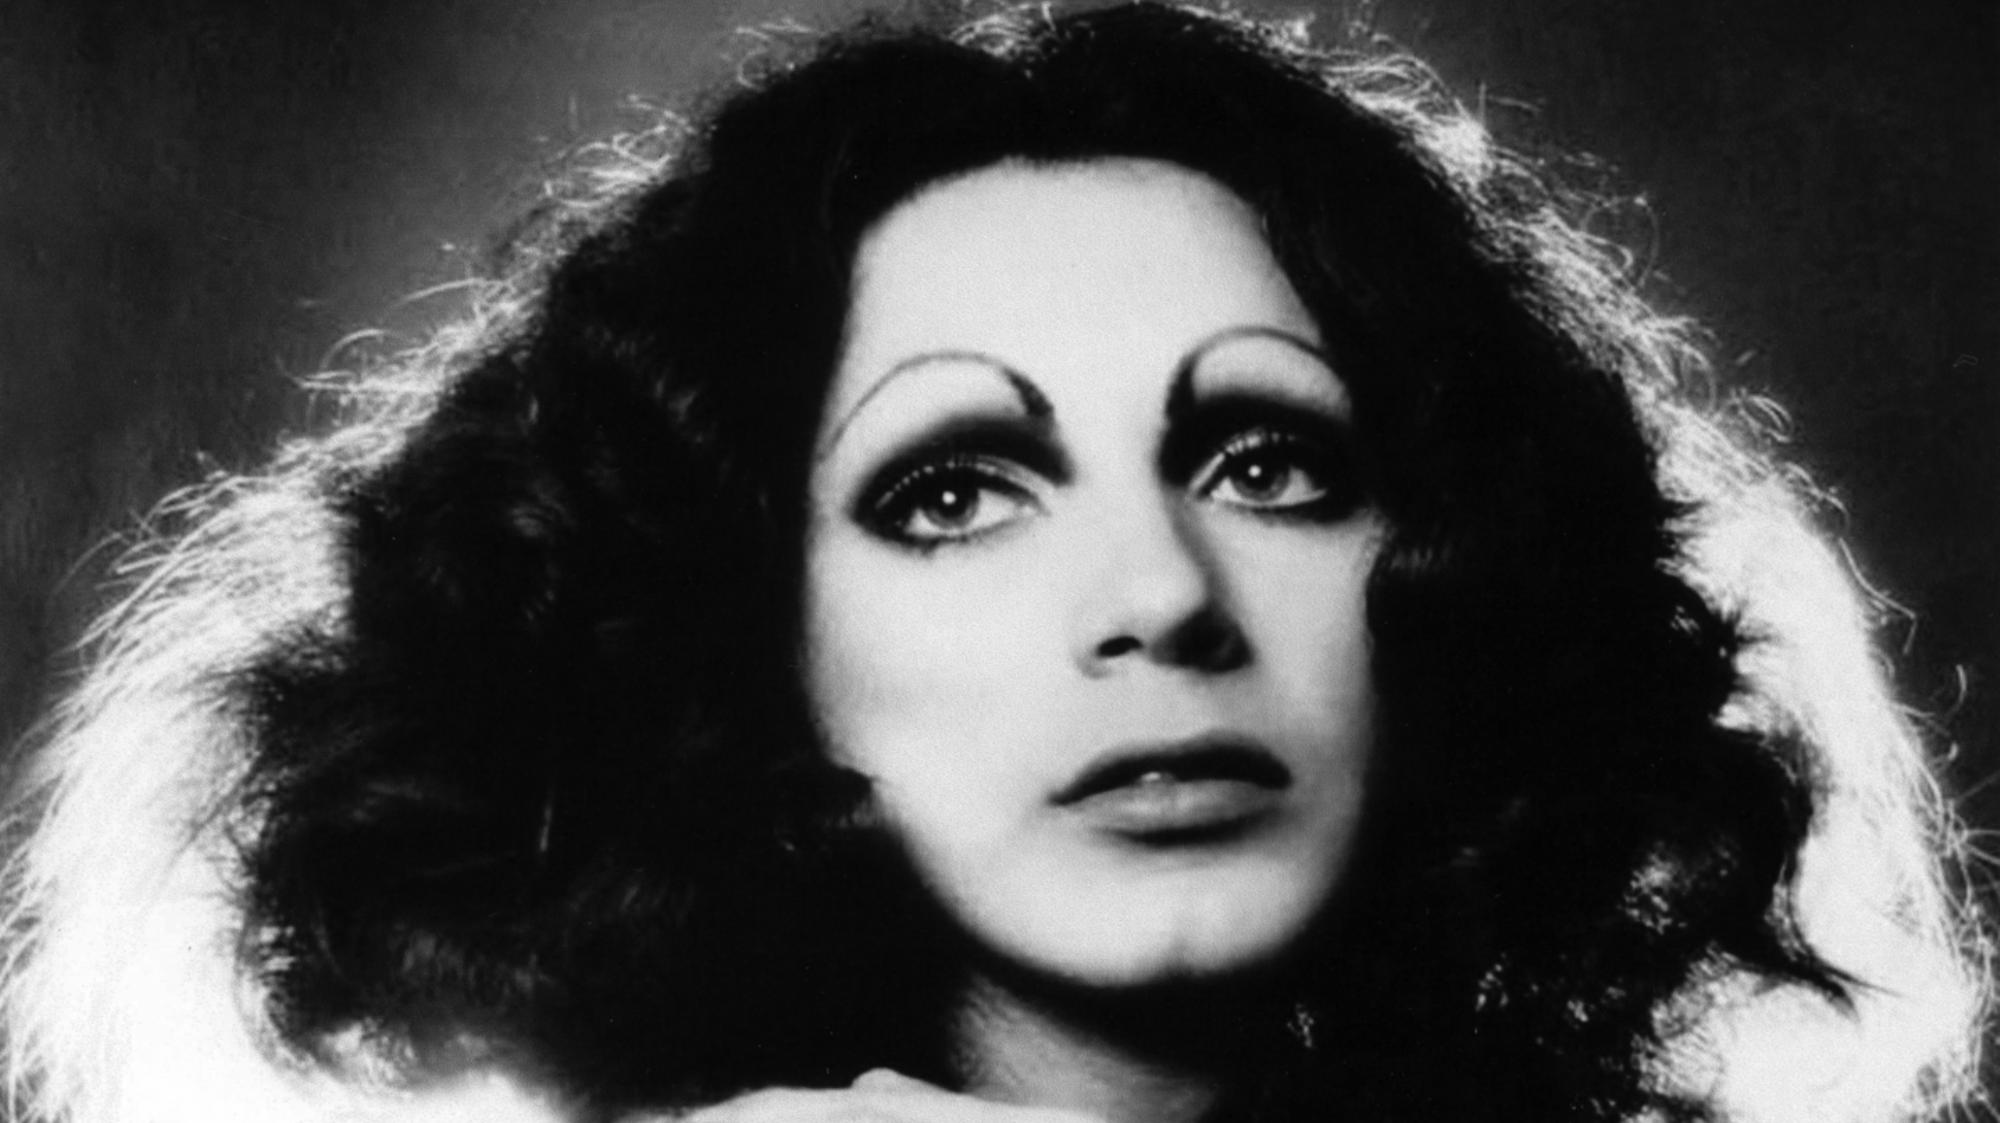 warhol-superstar-holly-woodlawn-came-from-miami-fla-1413196095